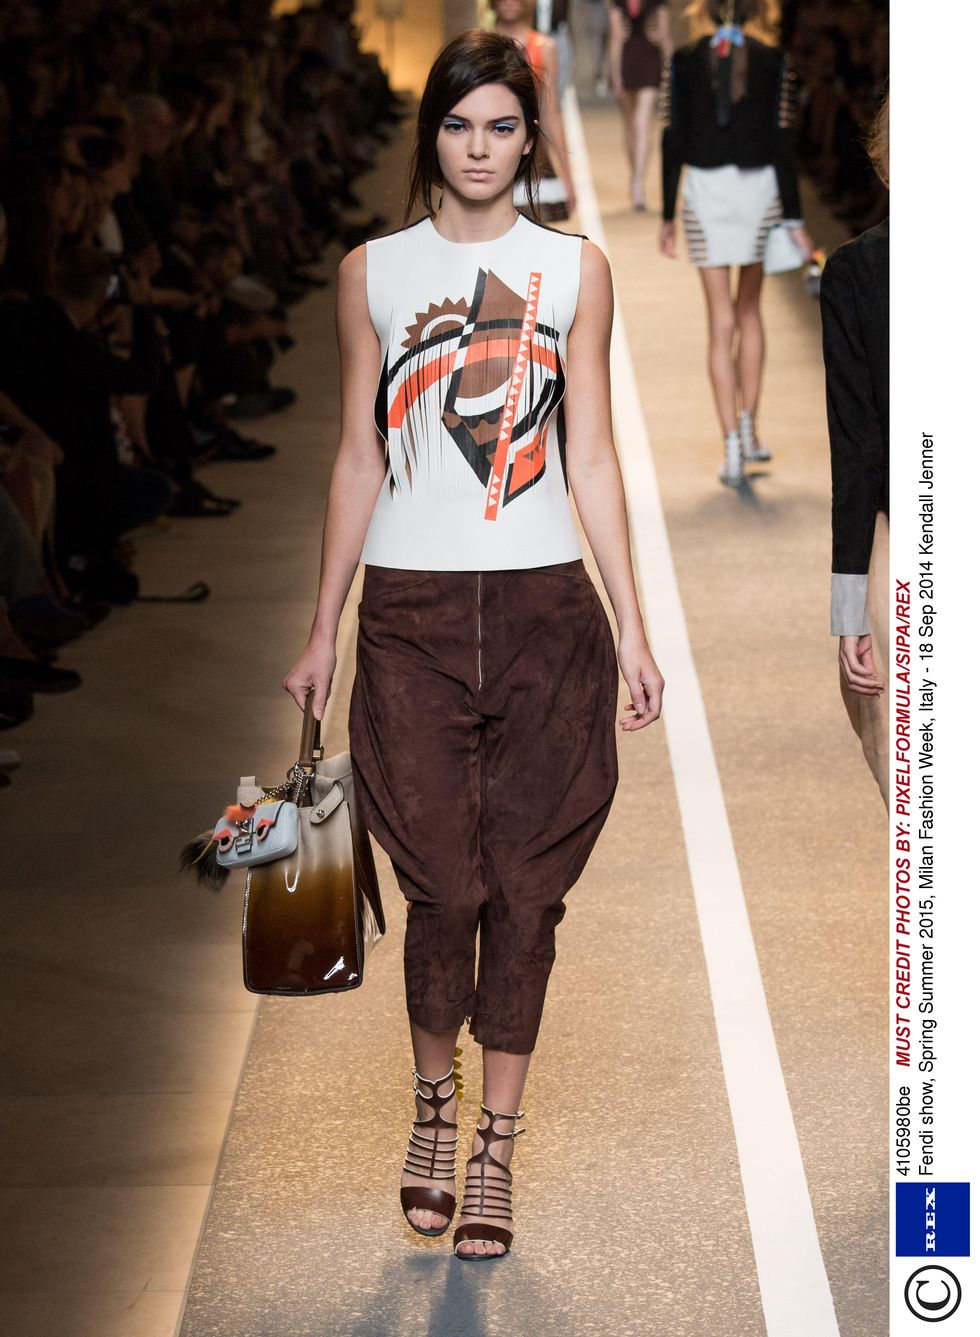 Kendall Jenner walks for Fendi SS15 at MFW